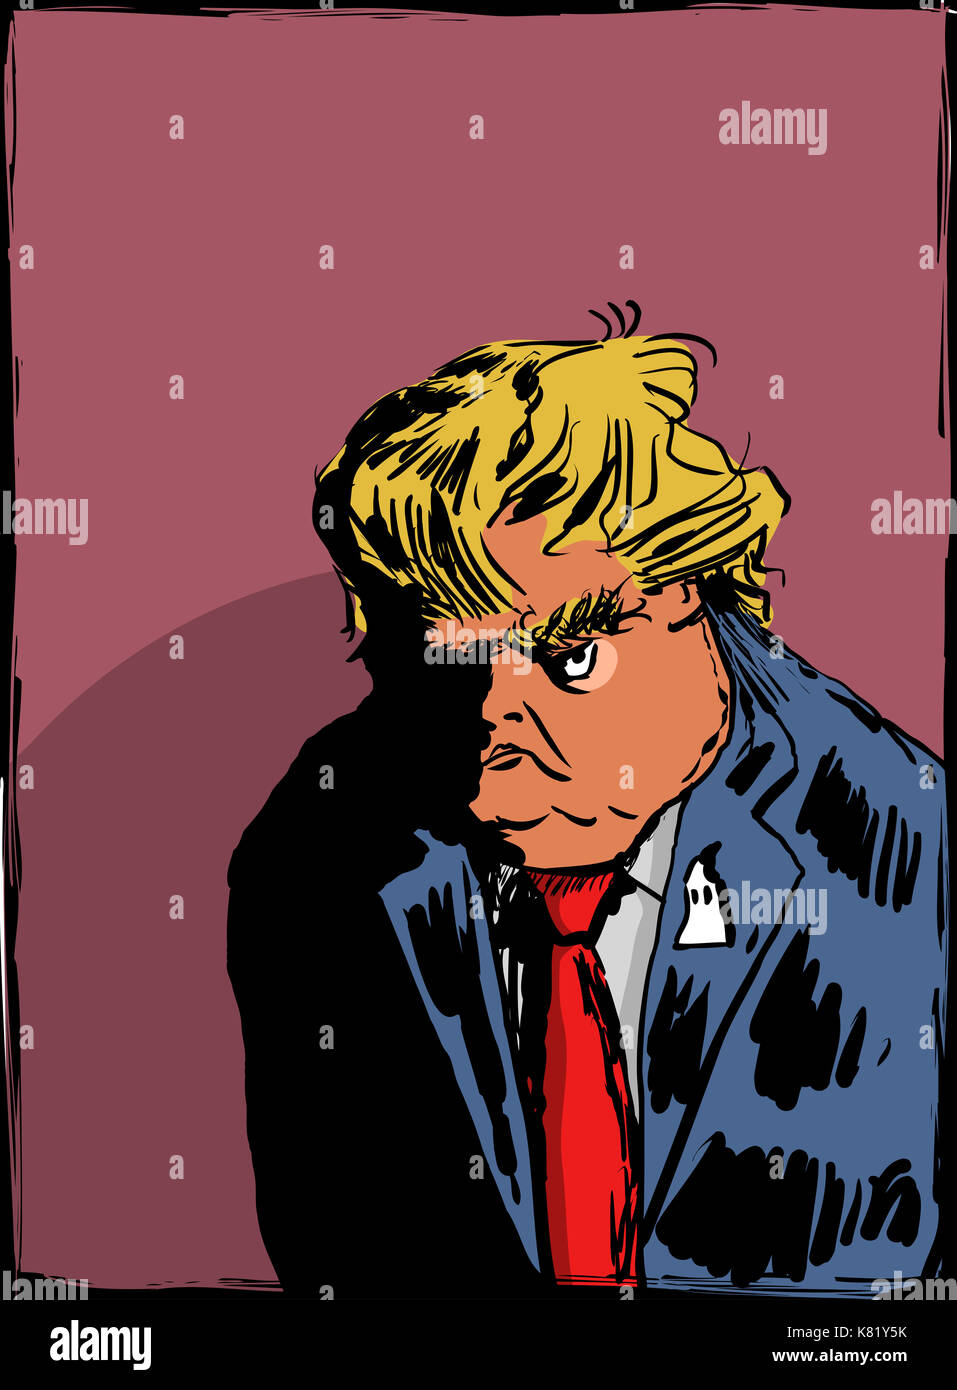 September 13, 2017. Caricature sketch of scowling reality show tv star celebrity Donald J. Trump Stock Photo